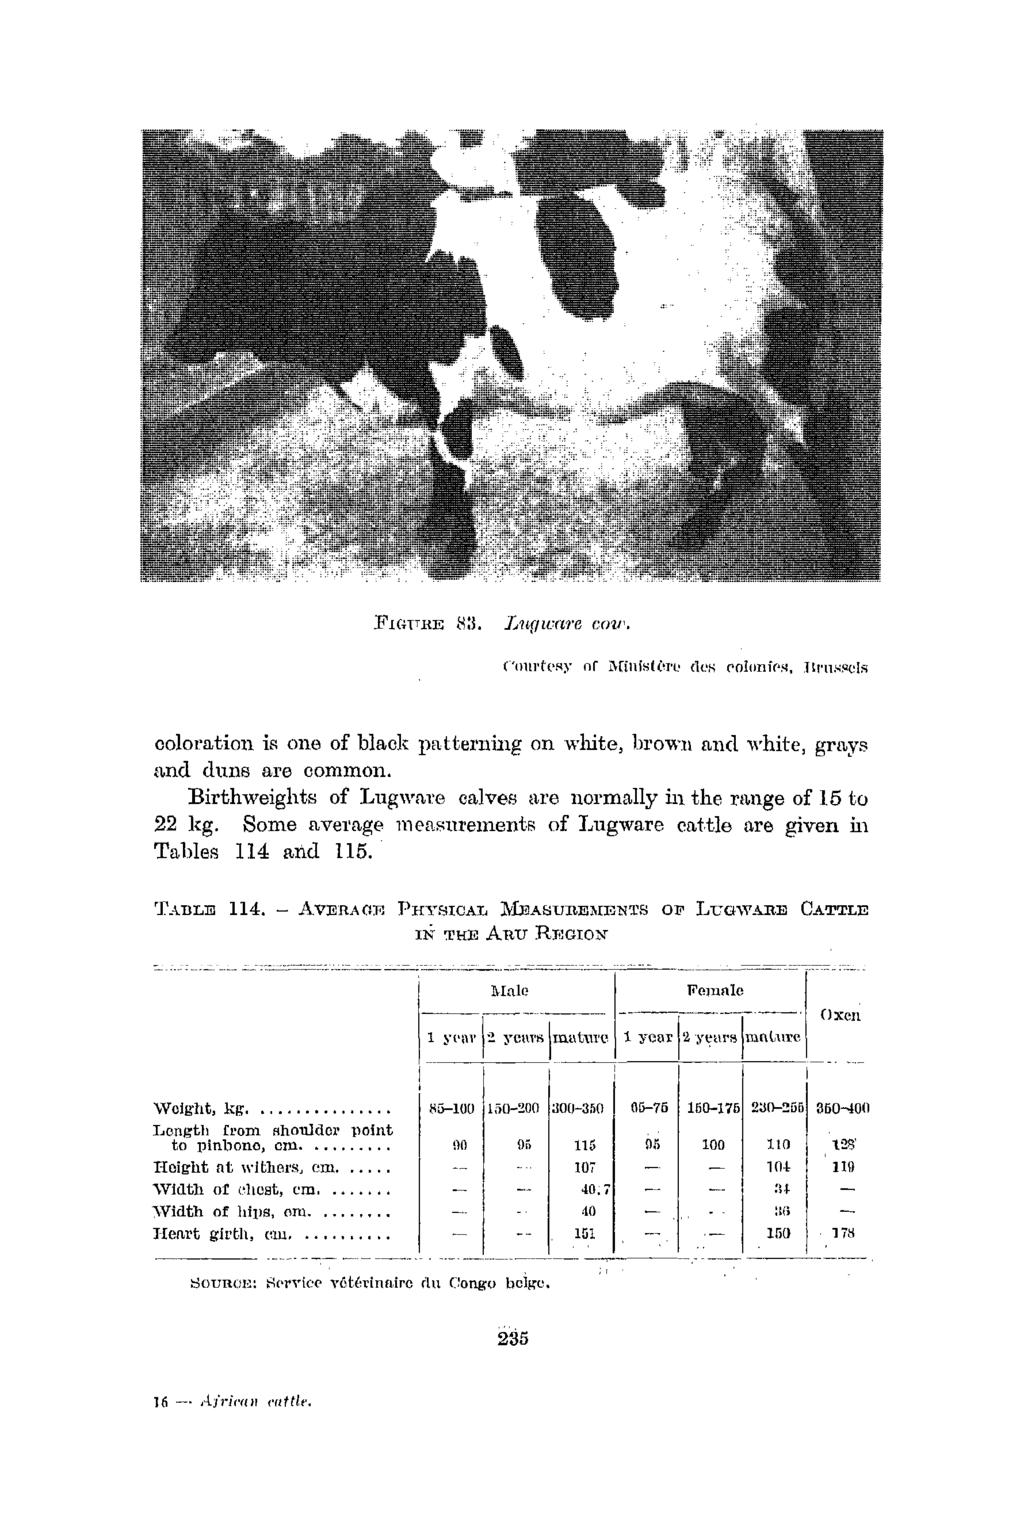 coloration ii\ one of black patterning on white, brown and white, grn,ys and duns are common. Birthweights of Lugwm:e calves are normally in the rn,nge of 15 to 22 kg.